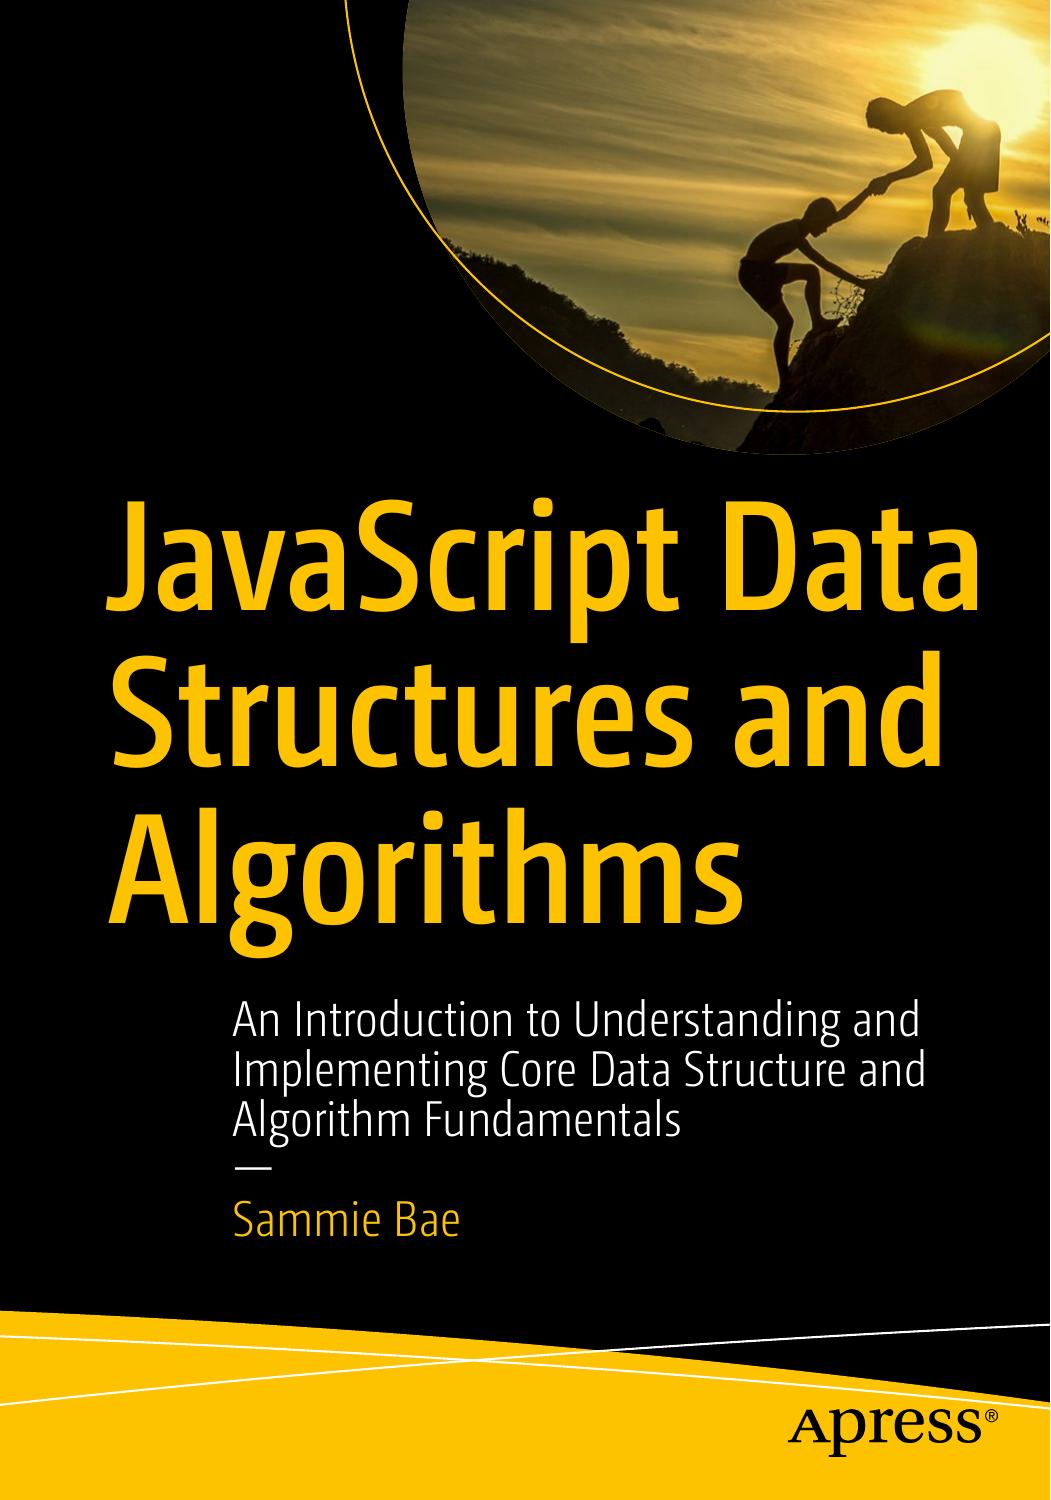 An Introduction to Understanding and Implementing Core Data Structure and Algorithm Fundamentals, 2019